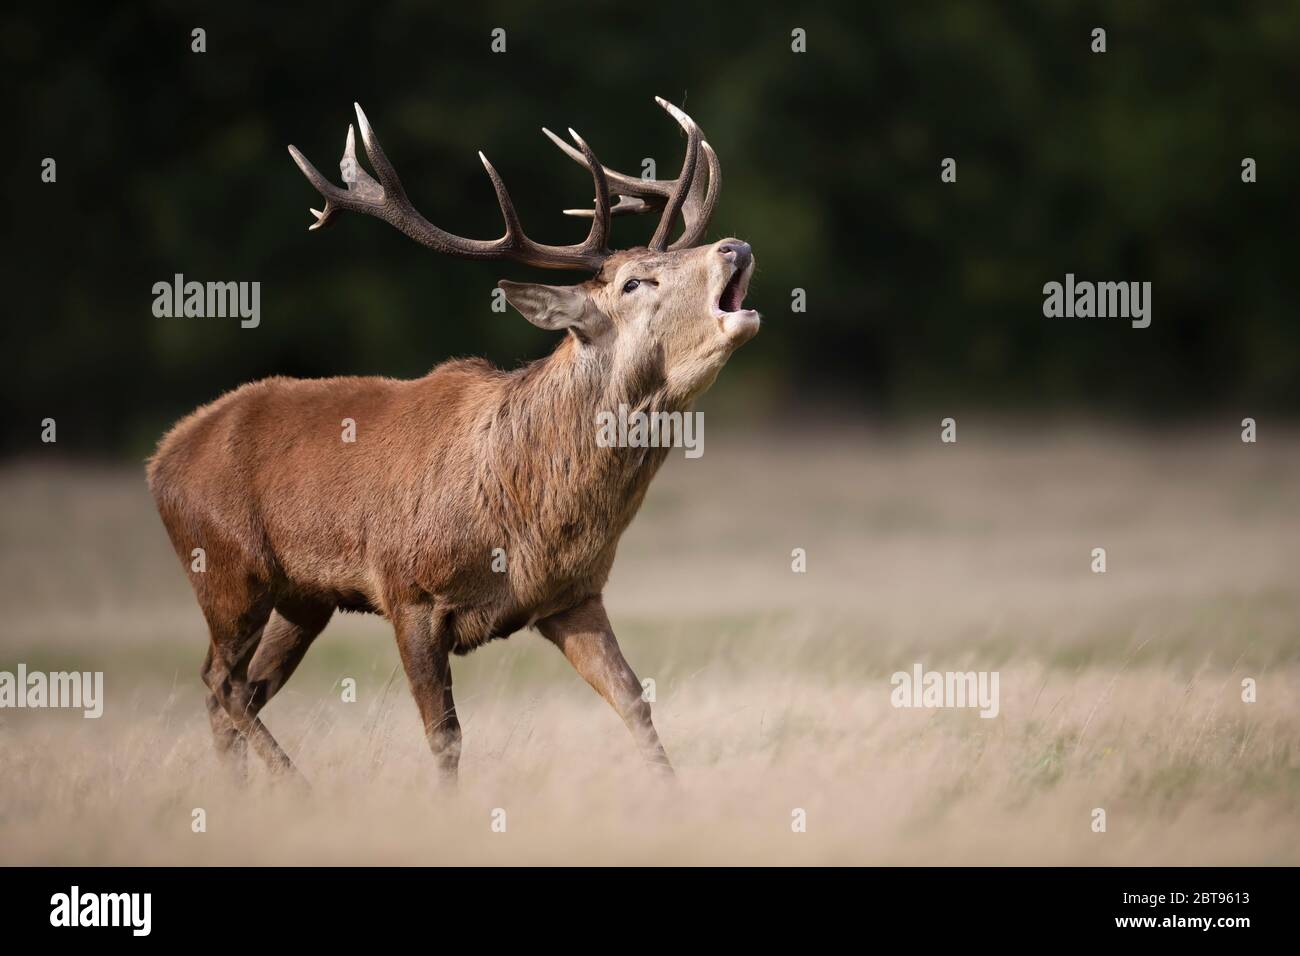 Close-up of a red deer stag calling during rutting season in autumn, UK. Stock Photo